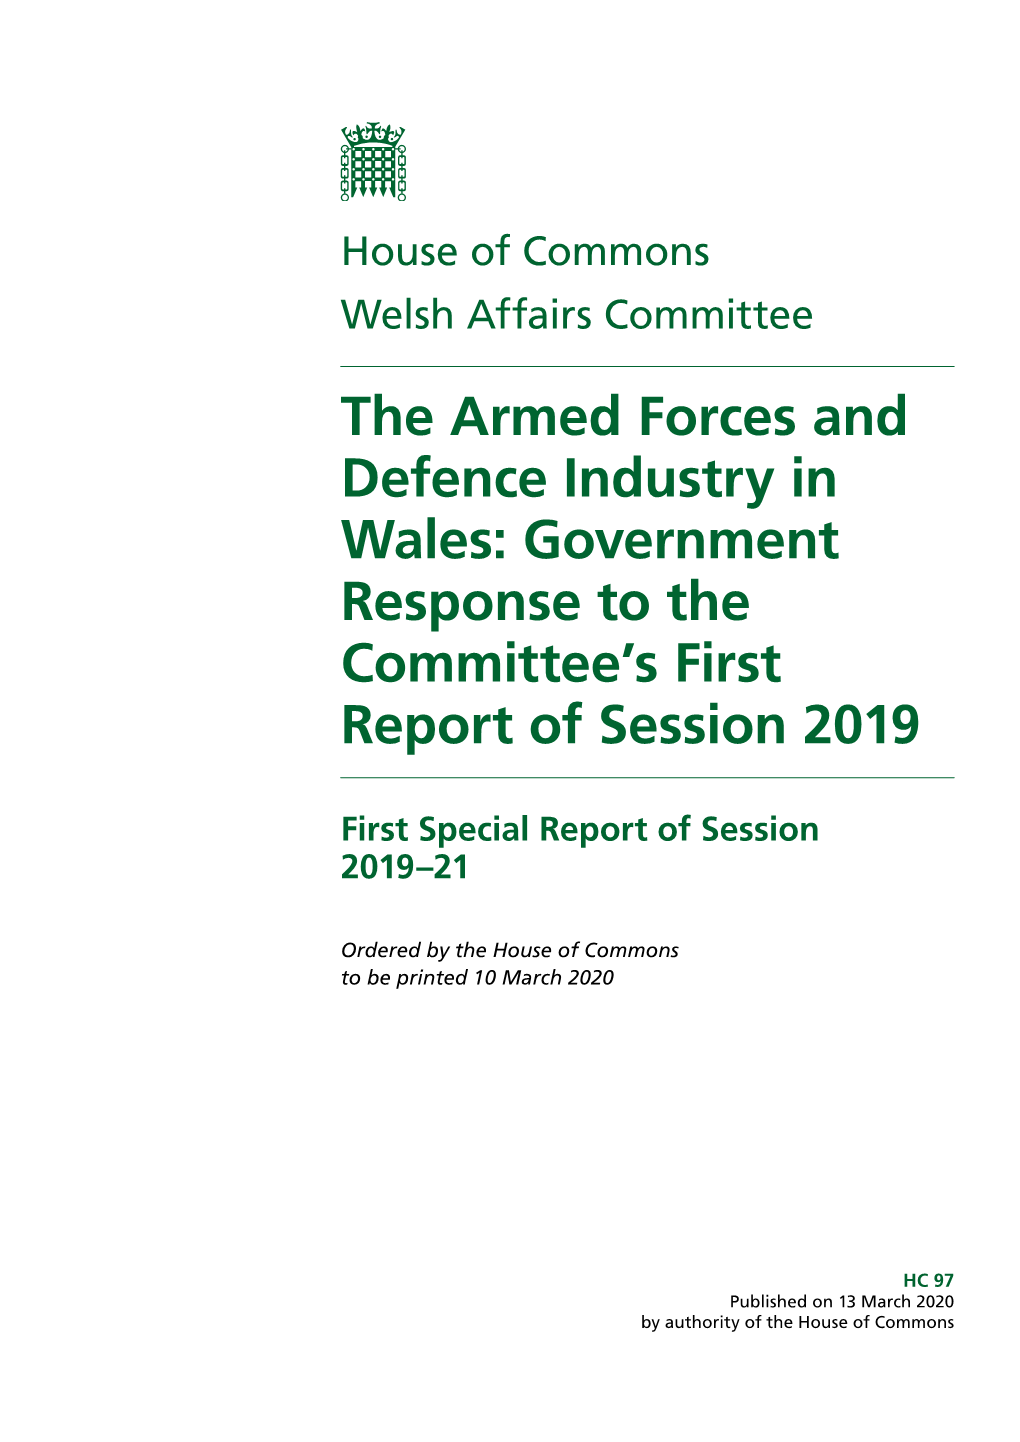 The Armed Forces and Defence Industry in Wales: Government Response to the Committee’S First Report of Session 2019